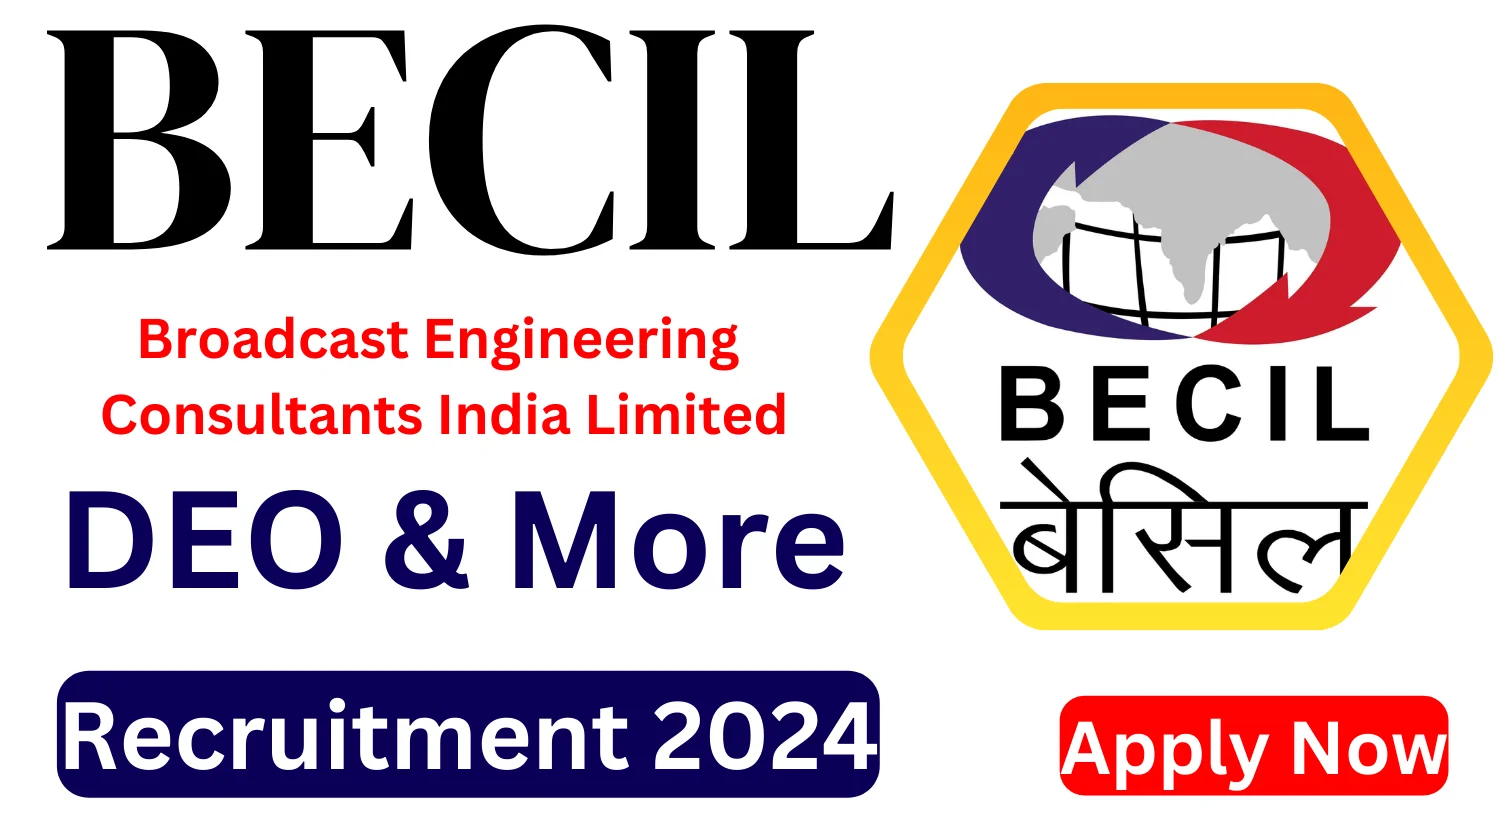 BECIL Recruitment 2024 Notification Out for DEO Assistant and More Vacancies